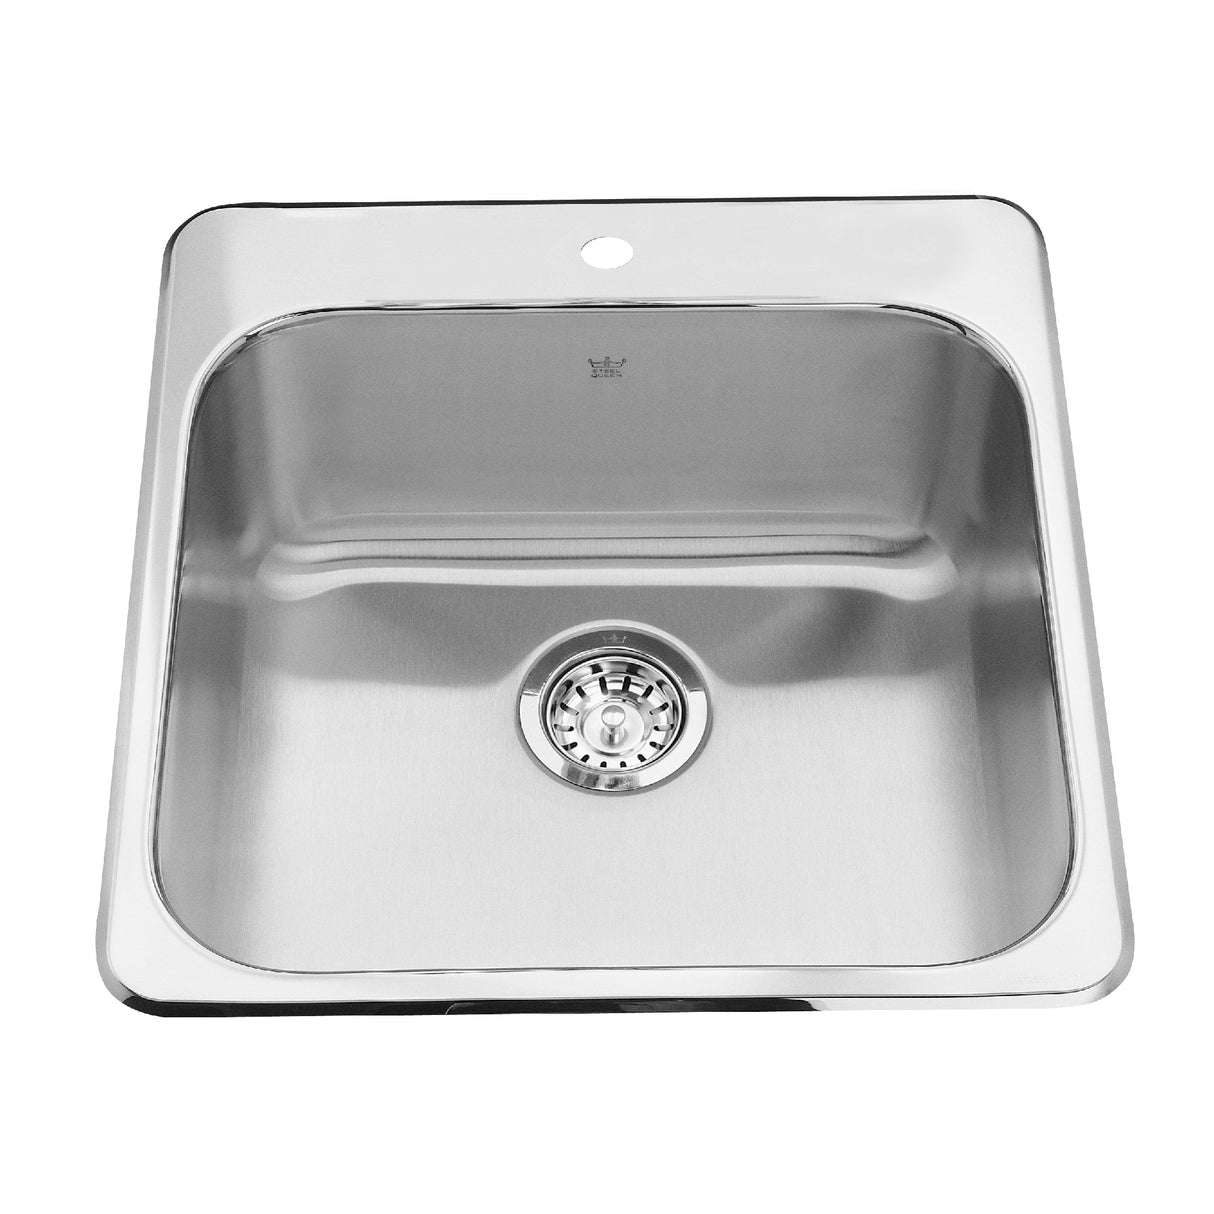 KINDRED QSL2020-8-1N Steel Queen 20-in LR x 20.5-in FB x 8-in DP Drop In Single Bowl 1-Hole Stainless Steel Kitchen Sink In Satin Finished Bowl with Mirror Finished Rim